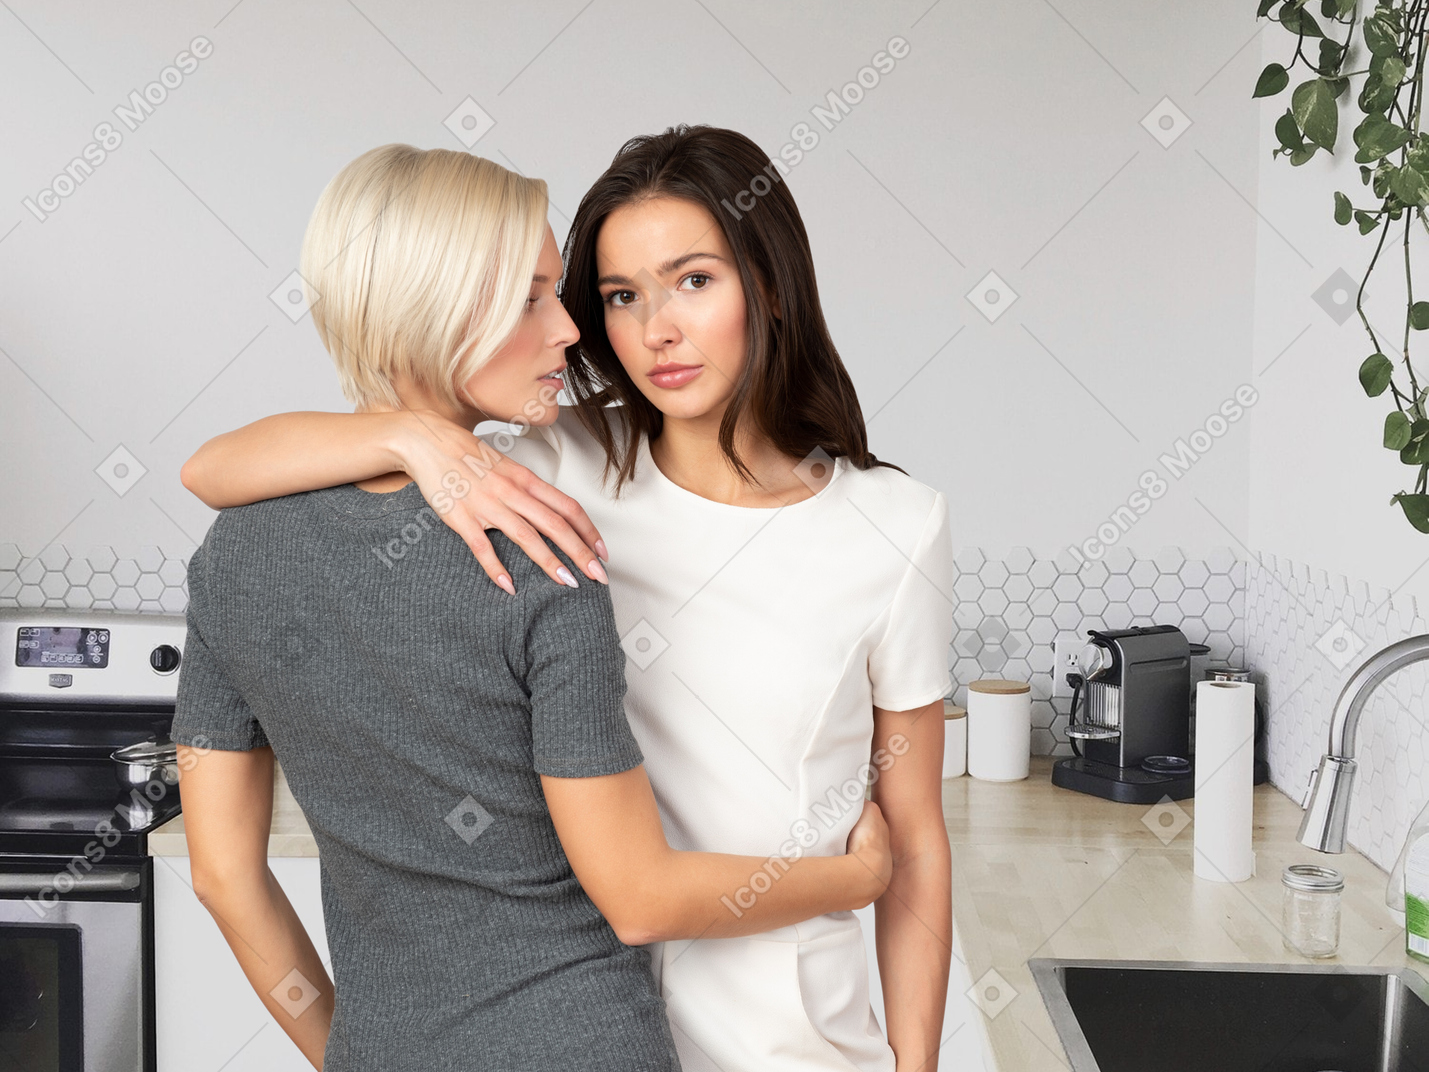 A couple of women holding each other